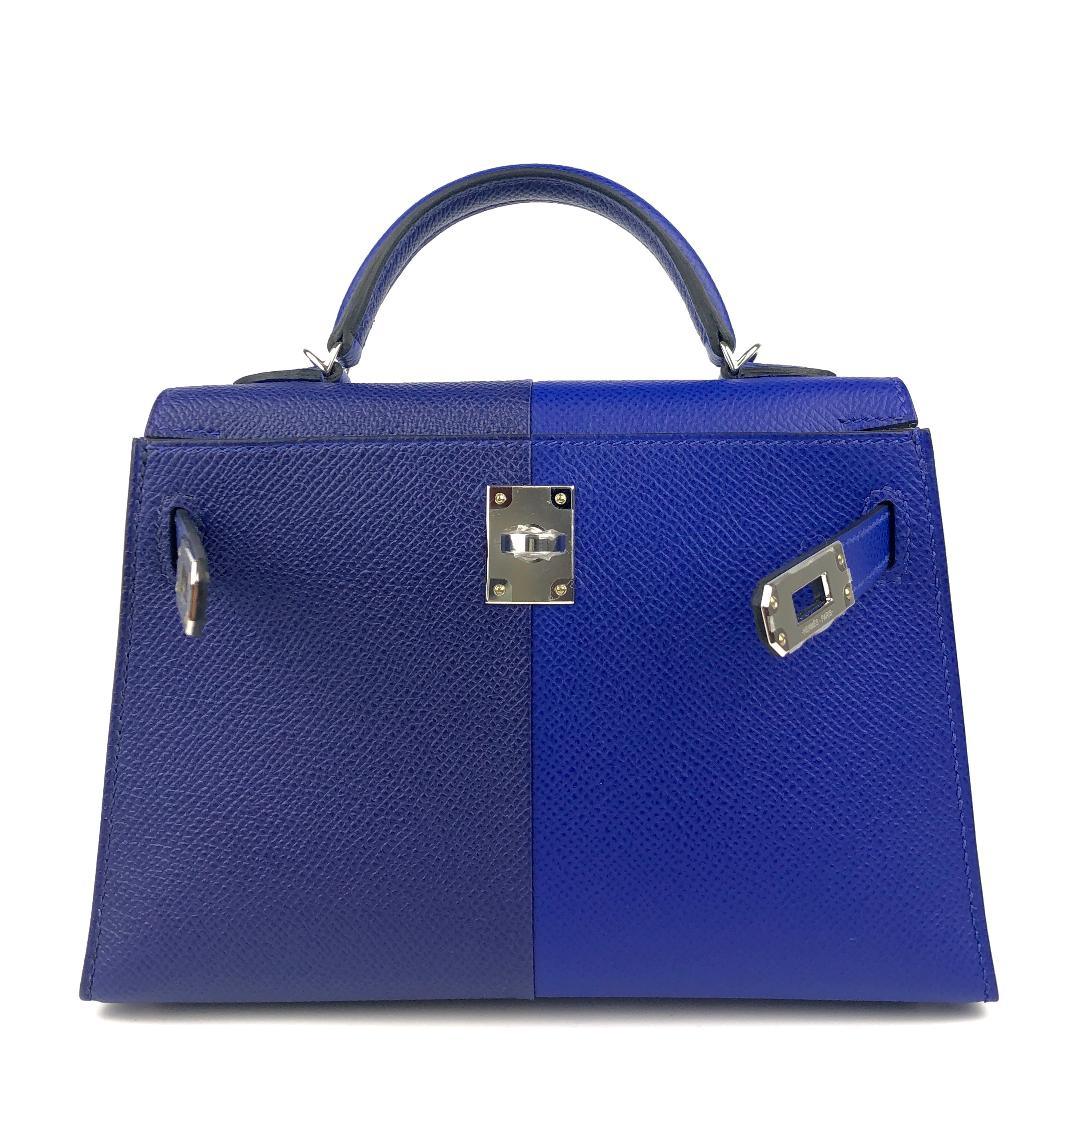 Get your hands on this stunning, limited edition Hermès 20cm Blue